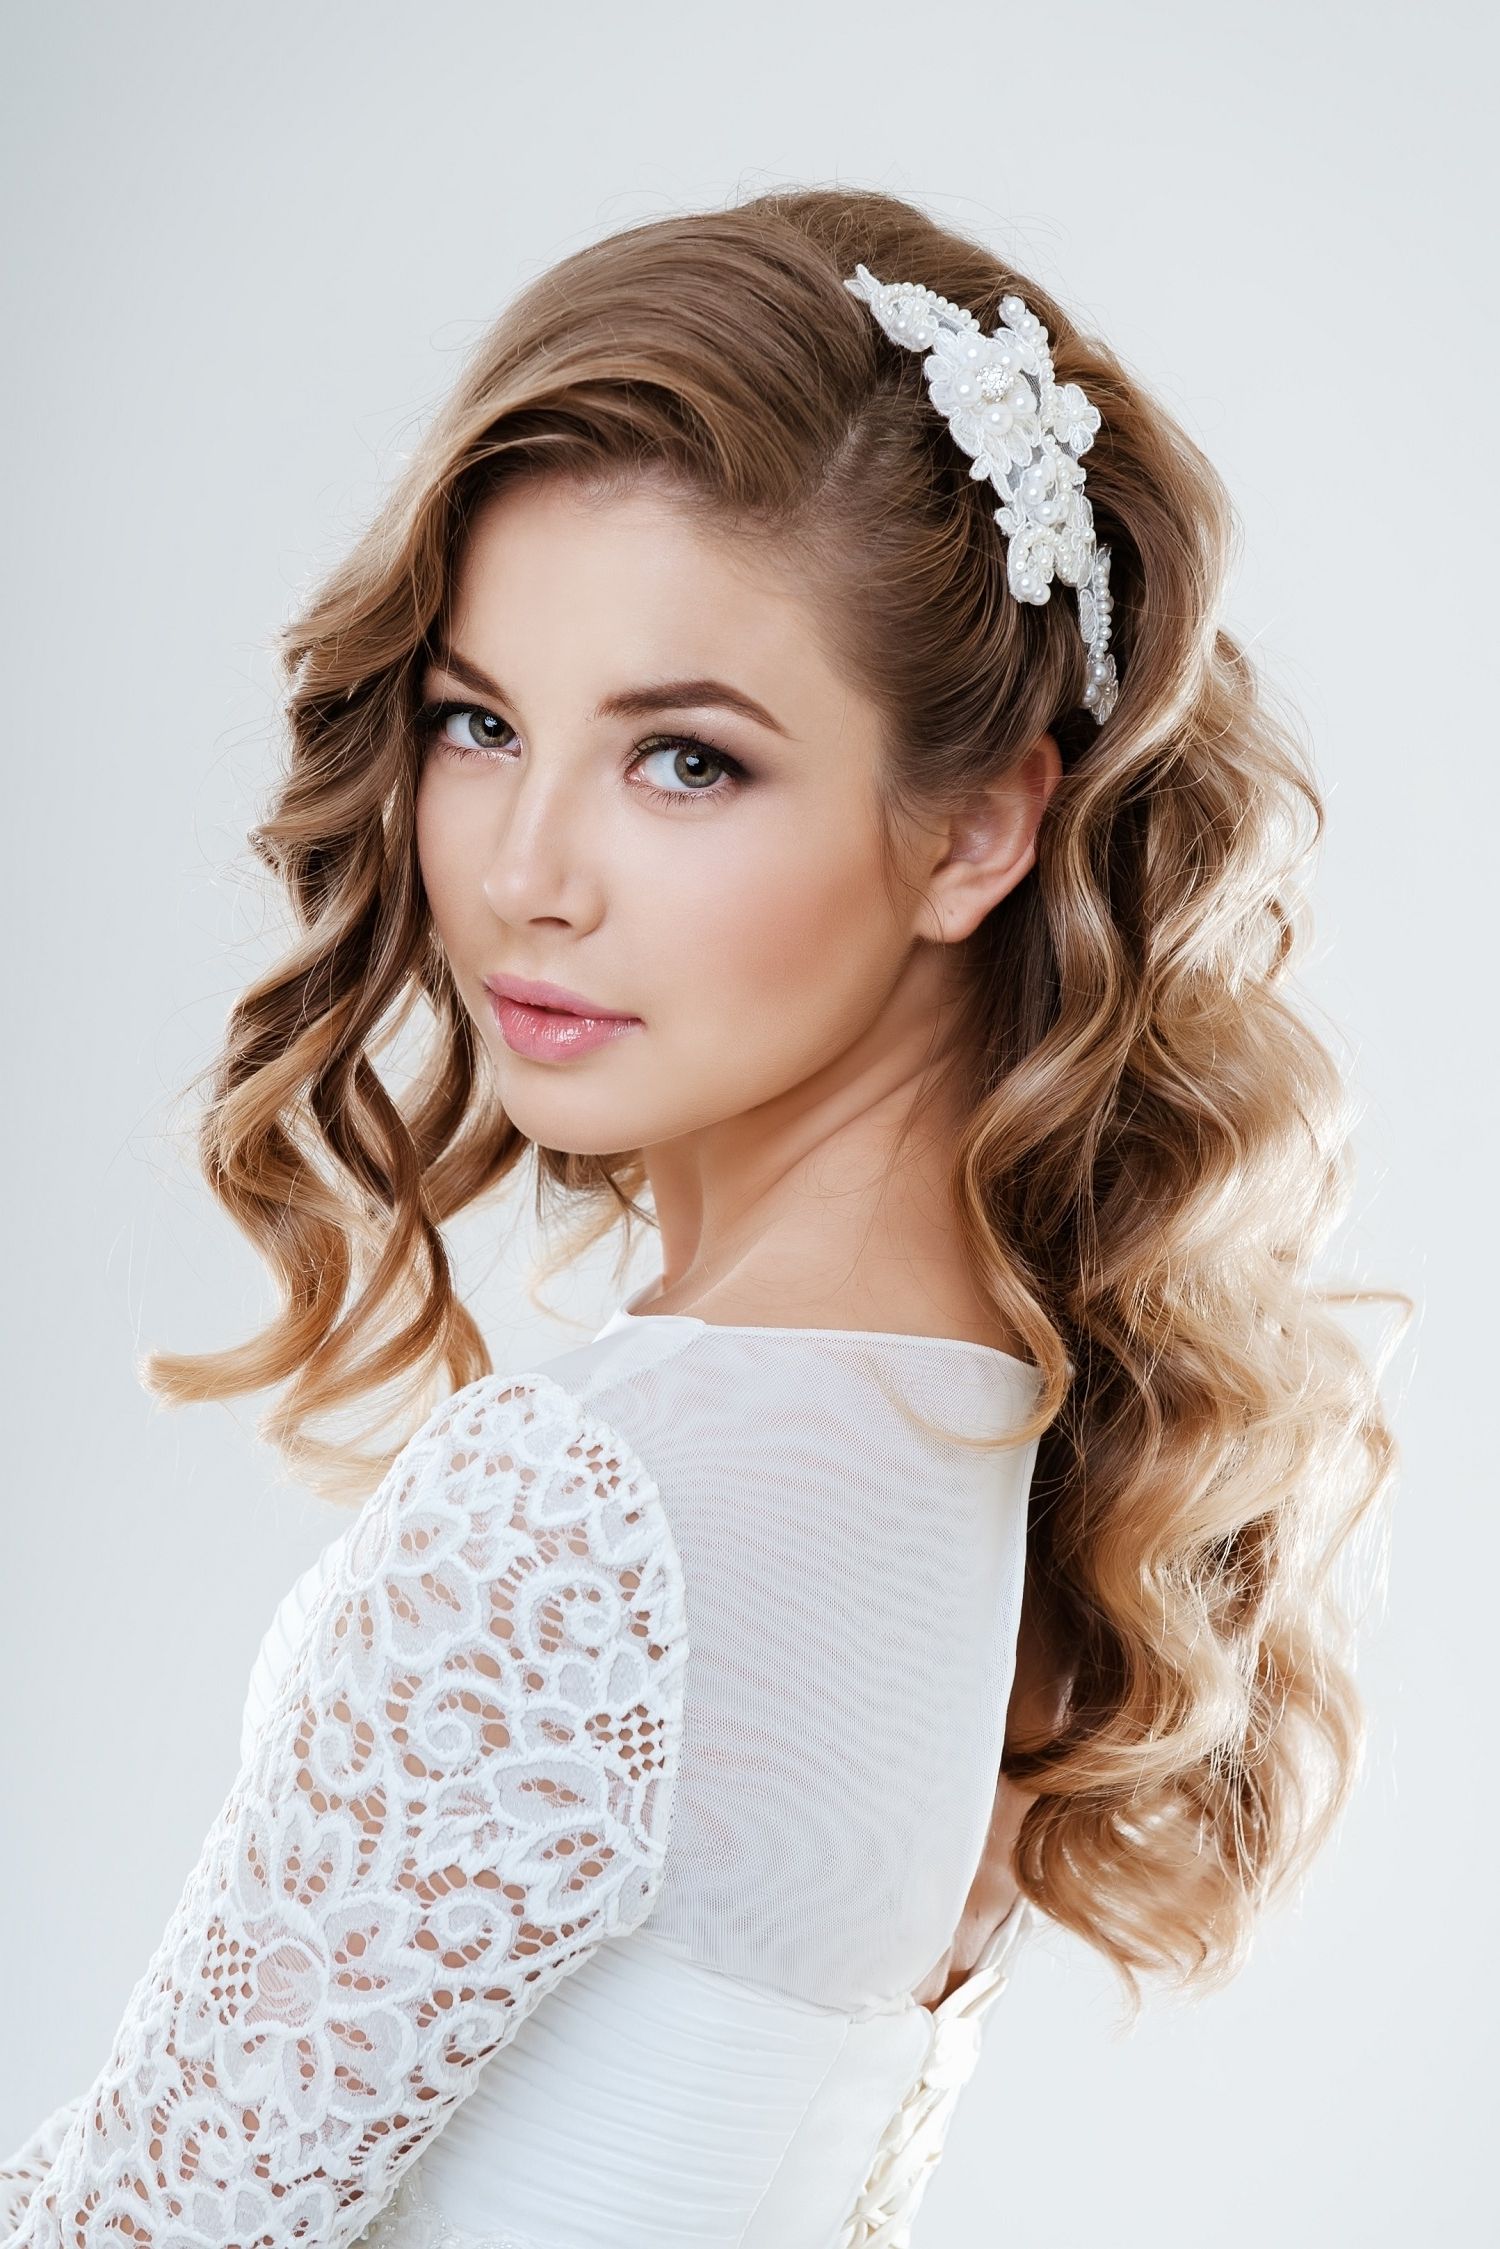 2017 Wedding Hairstyles For V Neck Dress Throughout Choosing The Perfect Hairstyle To Match Your Wedding Dress – Al (View 4 of 15)